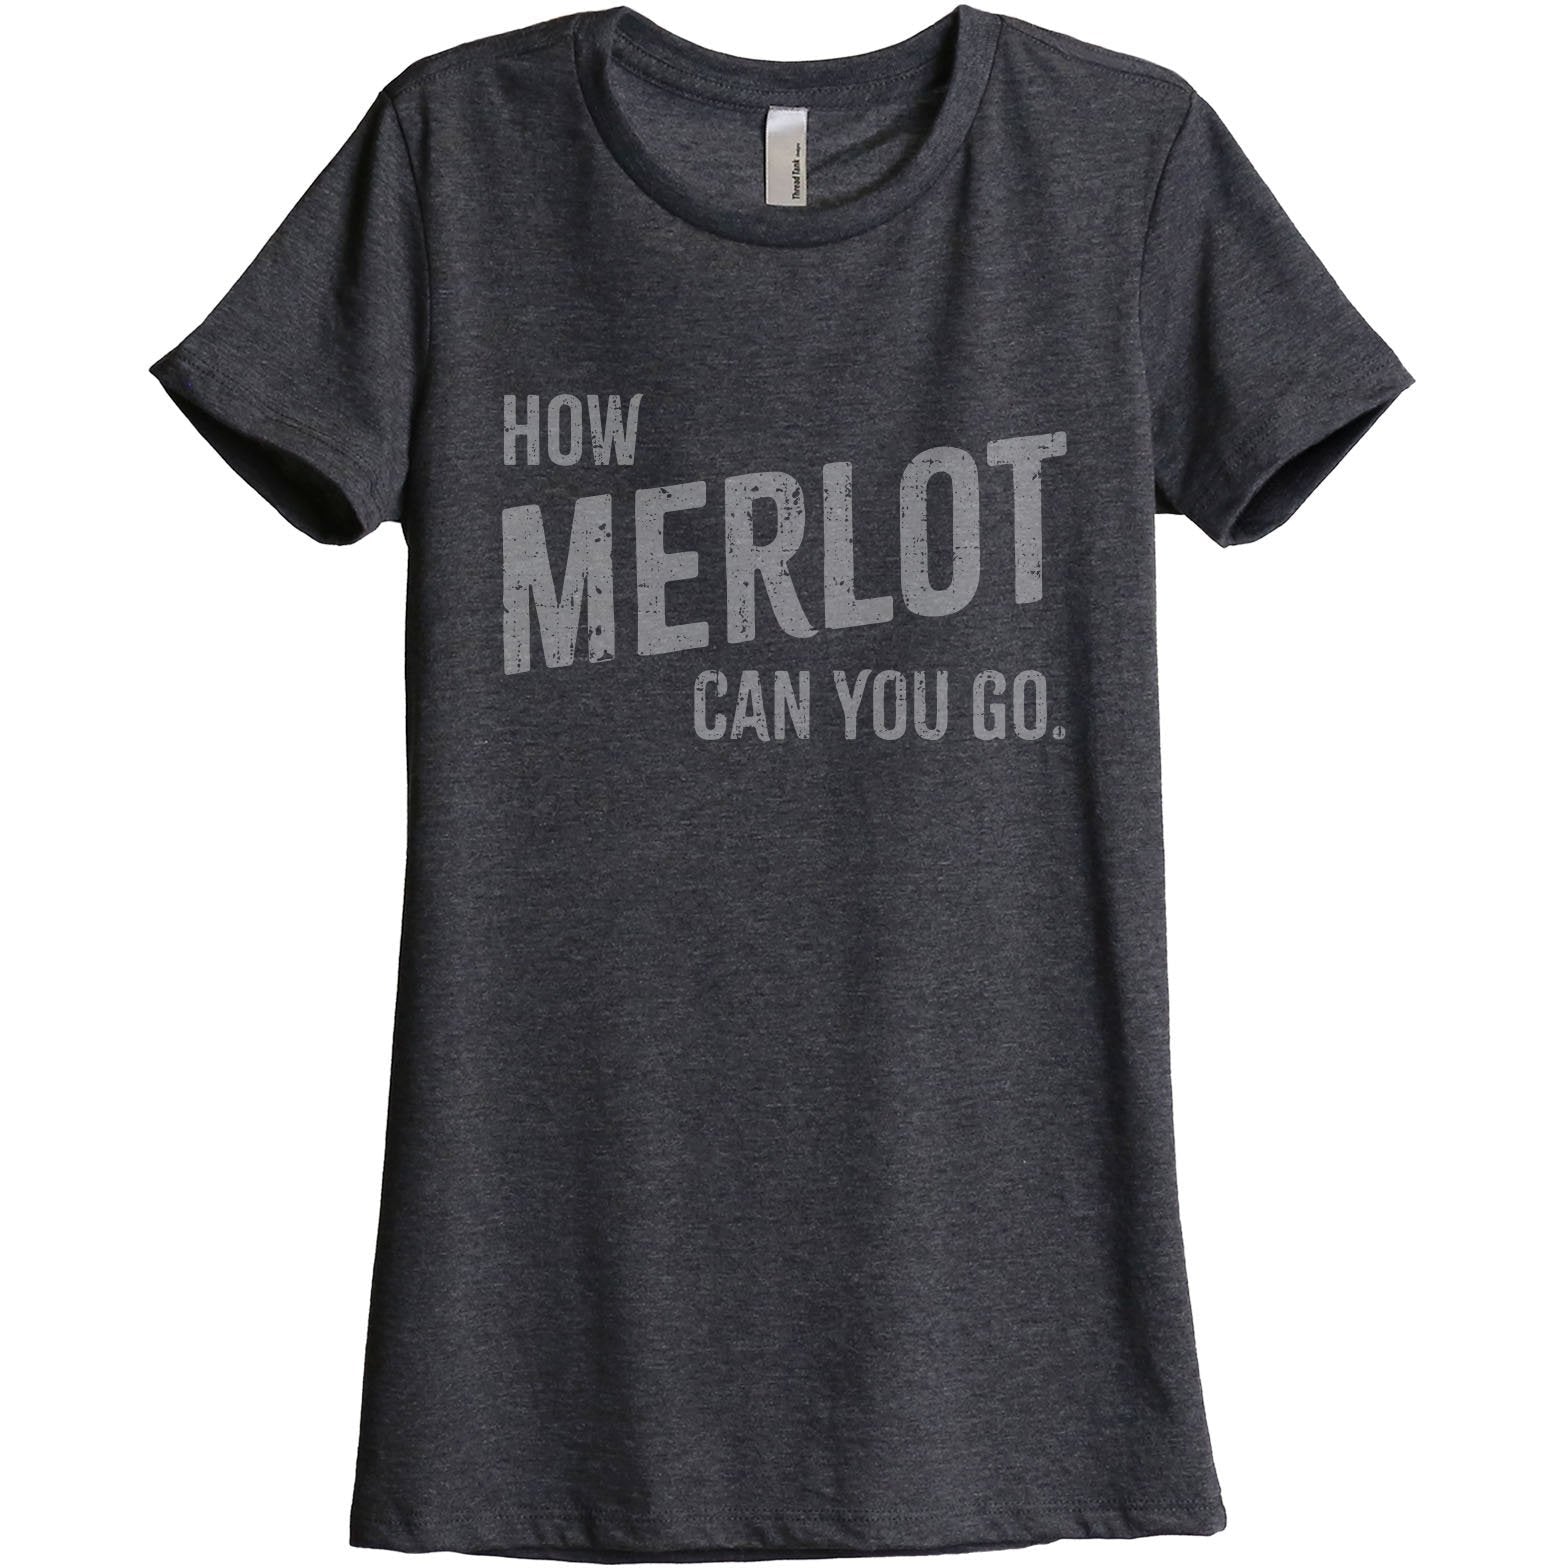 How Merlot Can You Go Women's Relaxed Crewneck T-Shirt Top Tee Charcoal